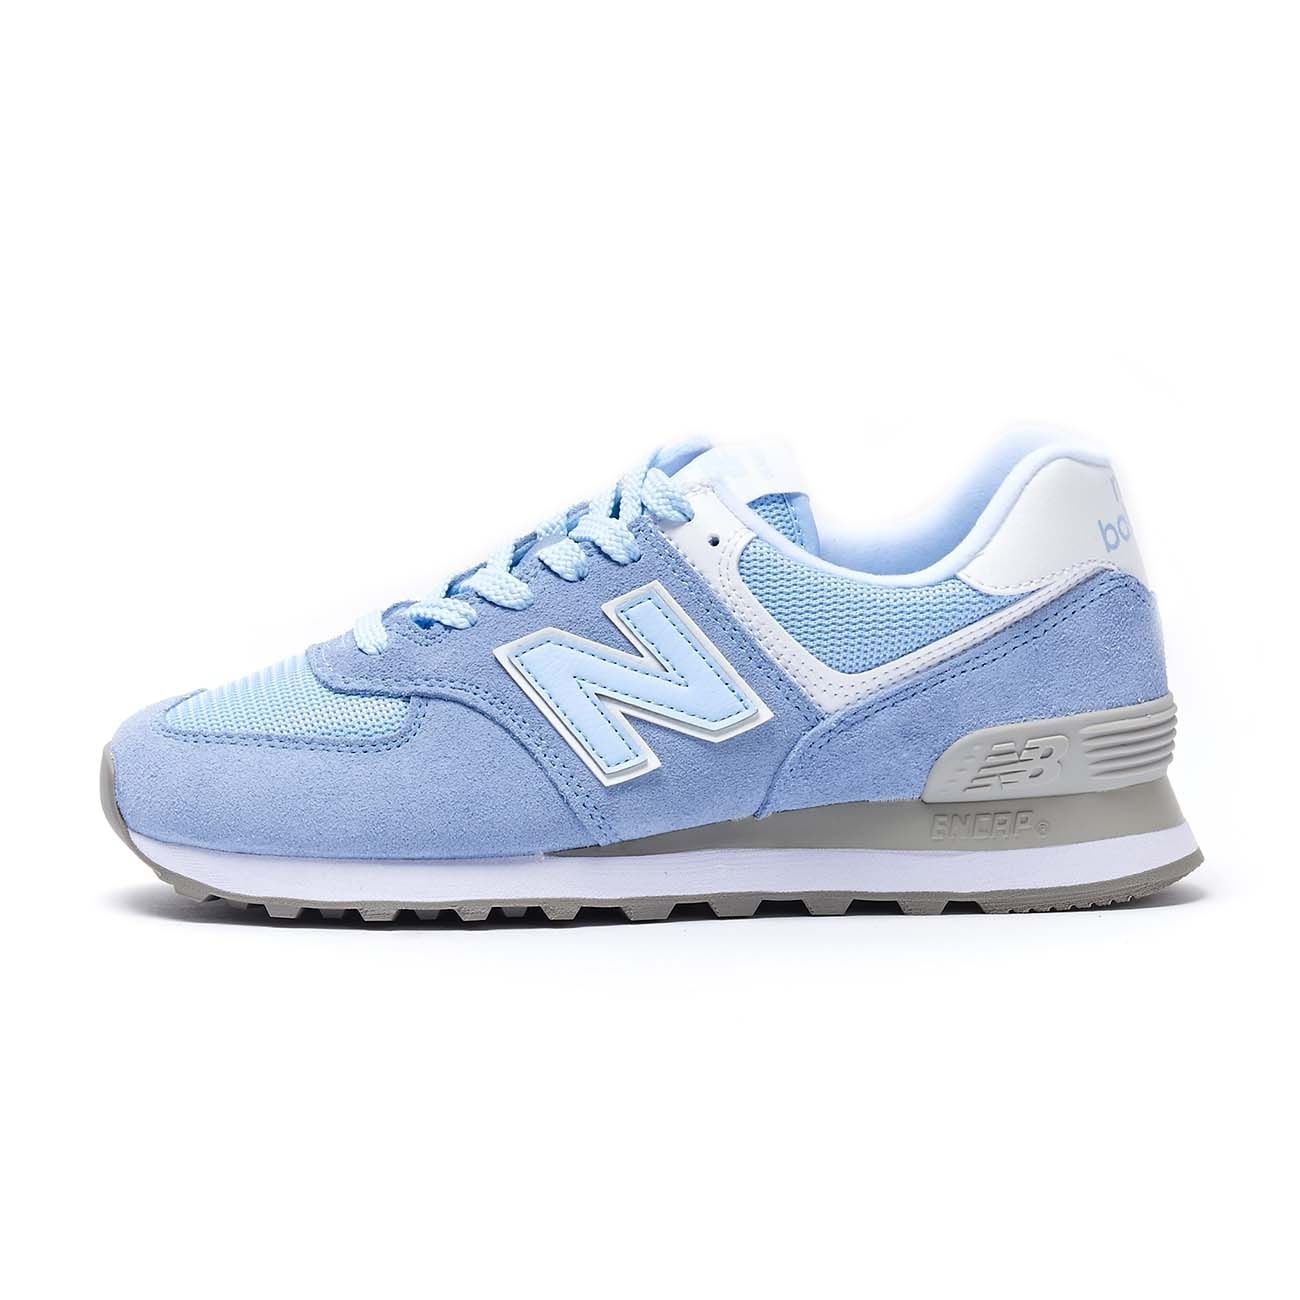 NEW BALANCE SNEAKERS 574 LIFESTYLE SUEDE MESH Donna Air light blu ...